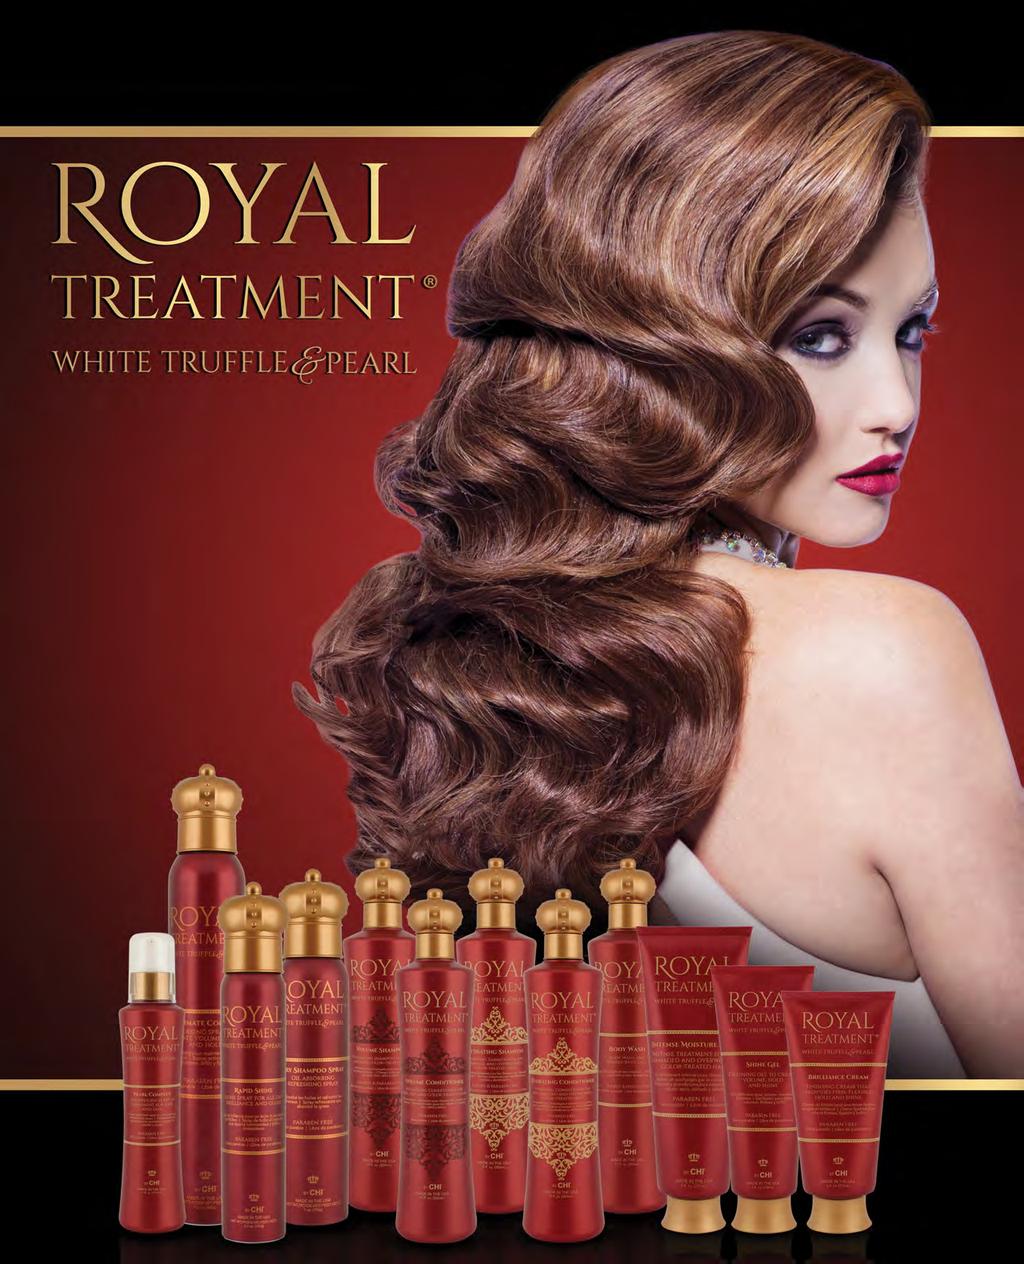 Royal Treatment features the exceptional benefits of White Truffle and Pearl, and contains Vitamin B, amino acids, proteins, and moisturizers.